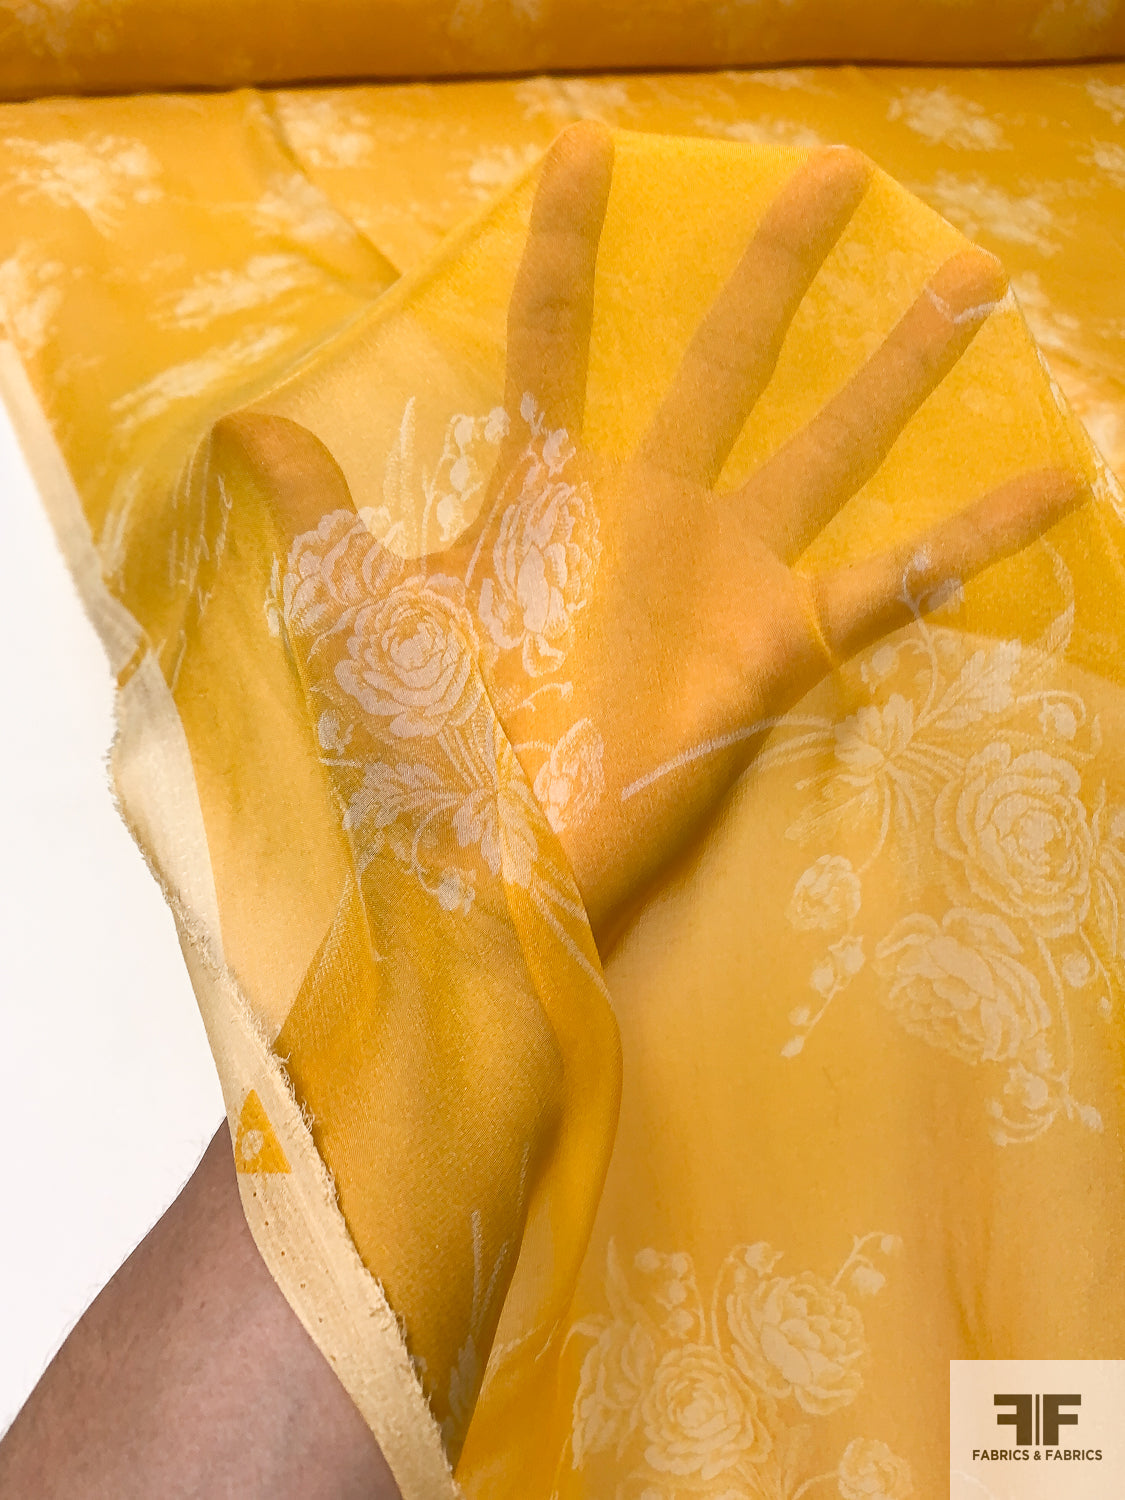 Floral Bouquets and French Love Notes Printed Silk Chiffon - Marigold / Off-White